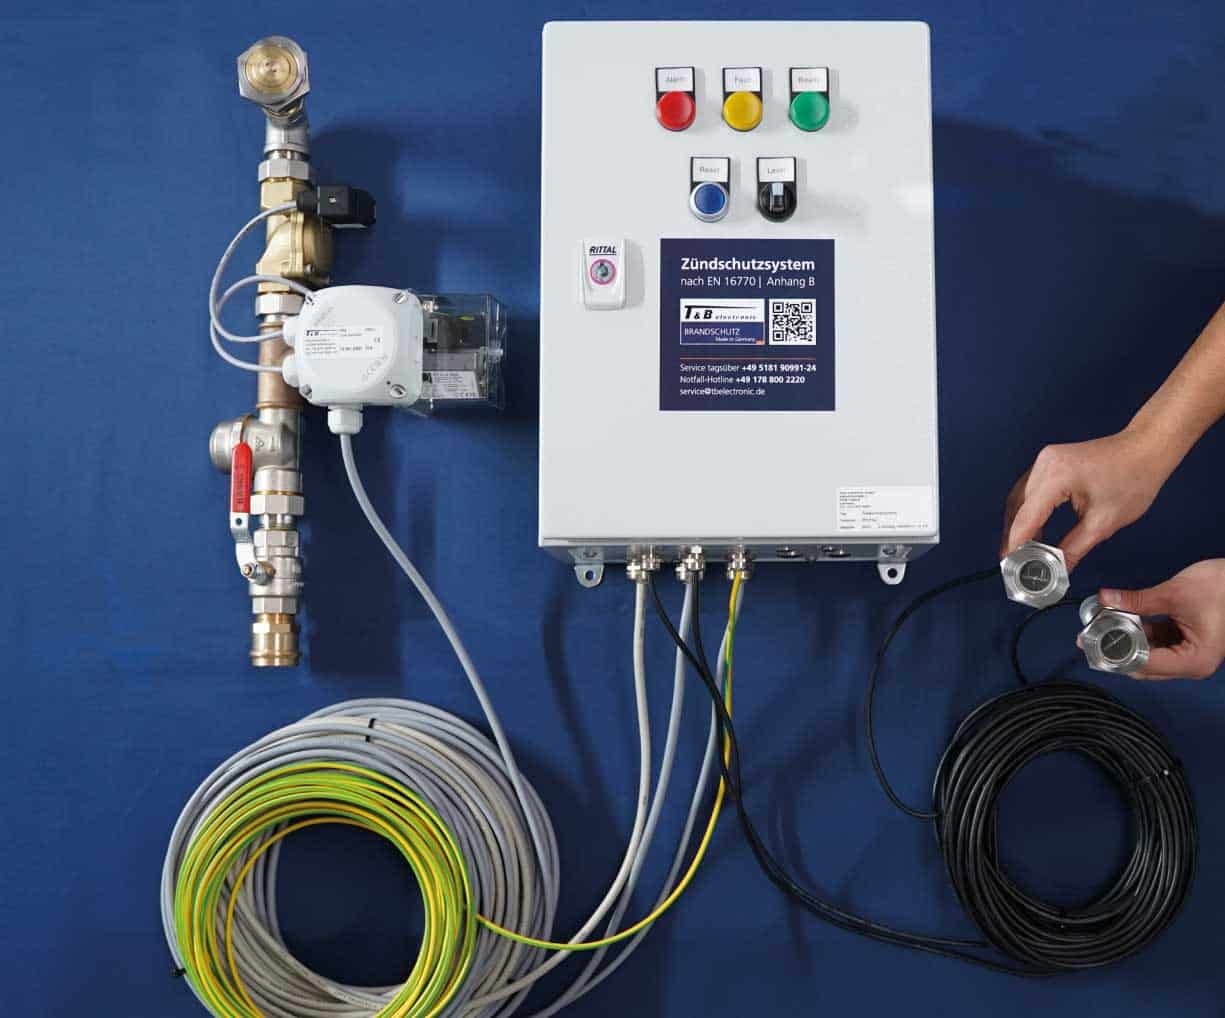 Ready-to-connect ignition protection system